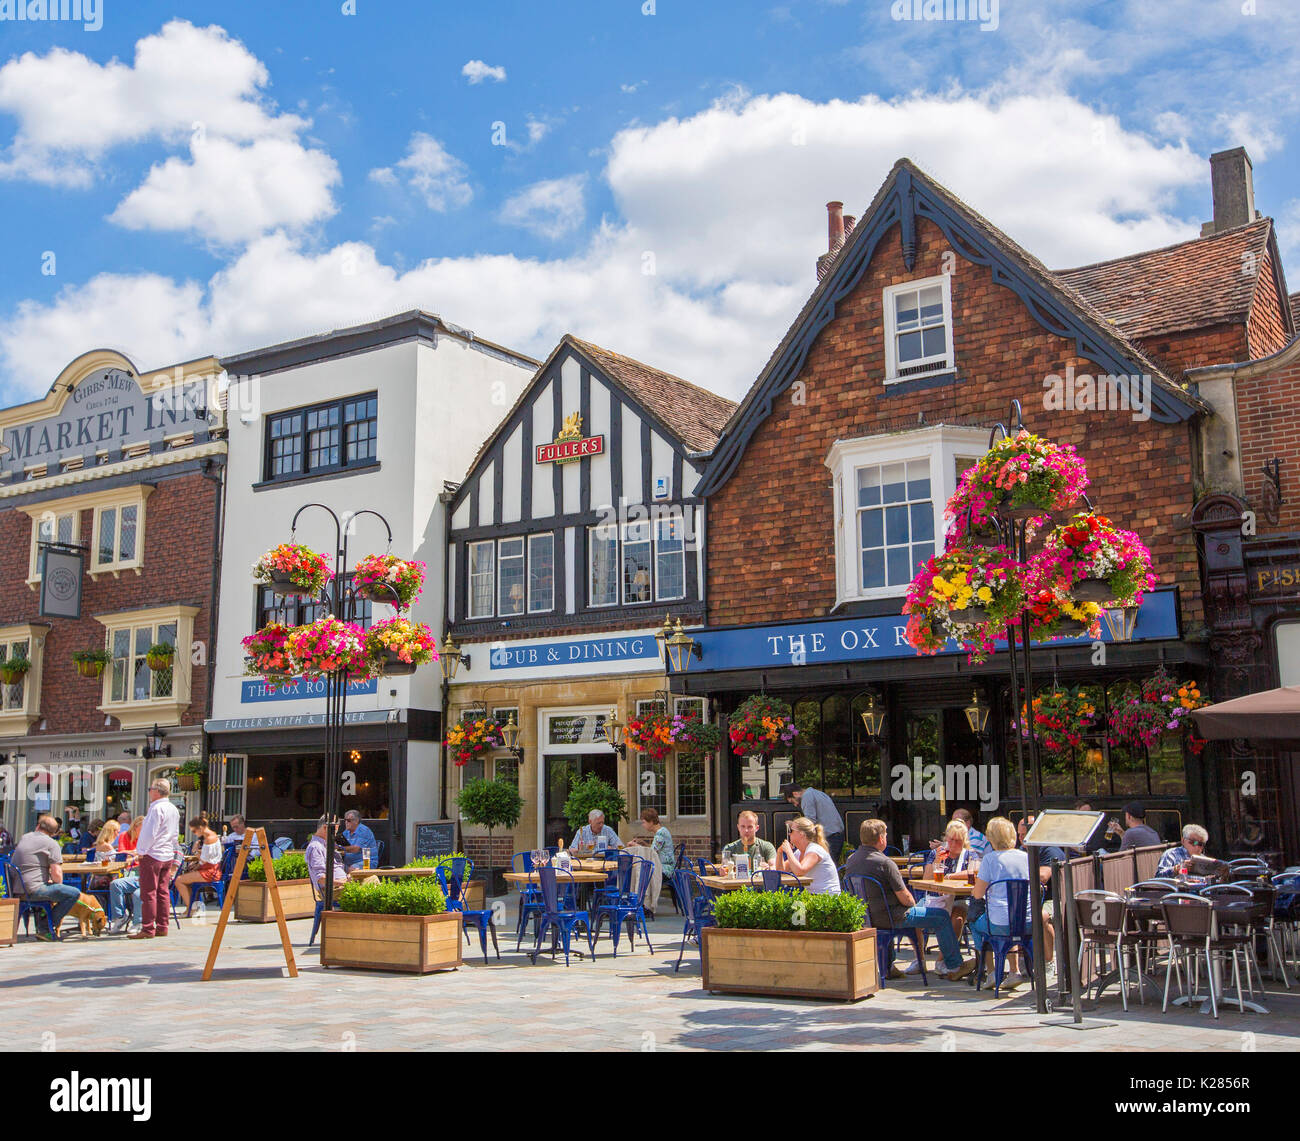 Diners at outdoor tables beside Ox Row Inn in historic market square adorned with hanging baskets of flowers under blue sky in Salisbury, England Stock Photo